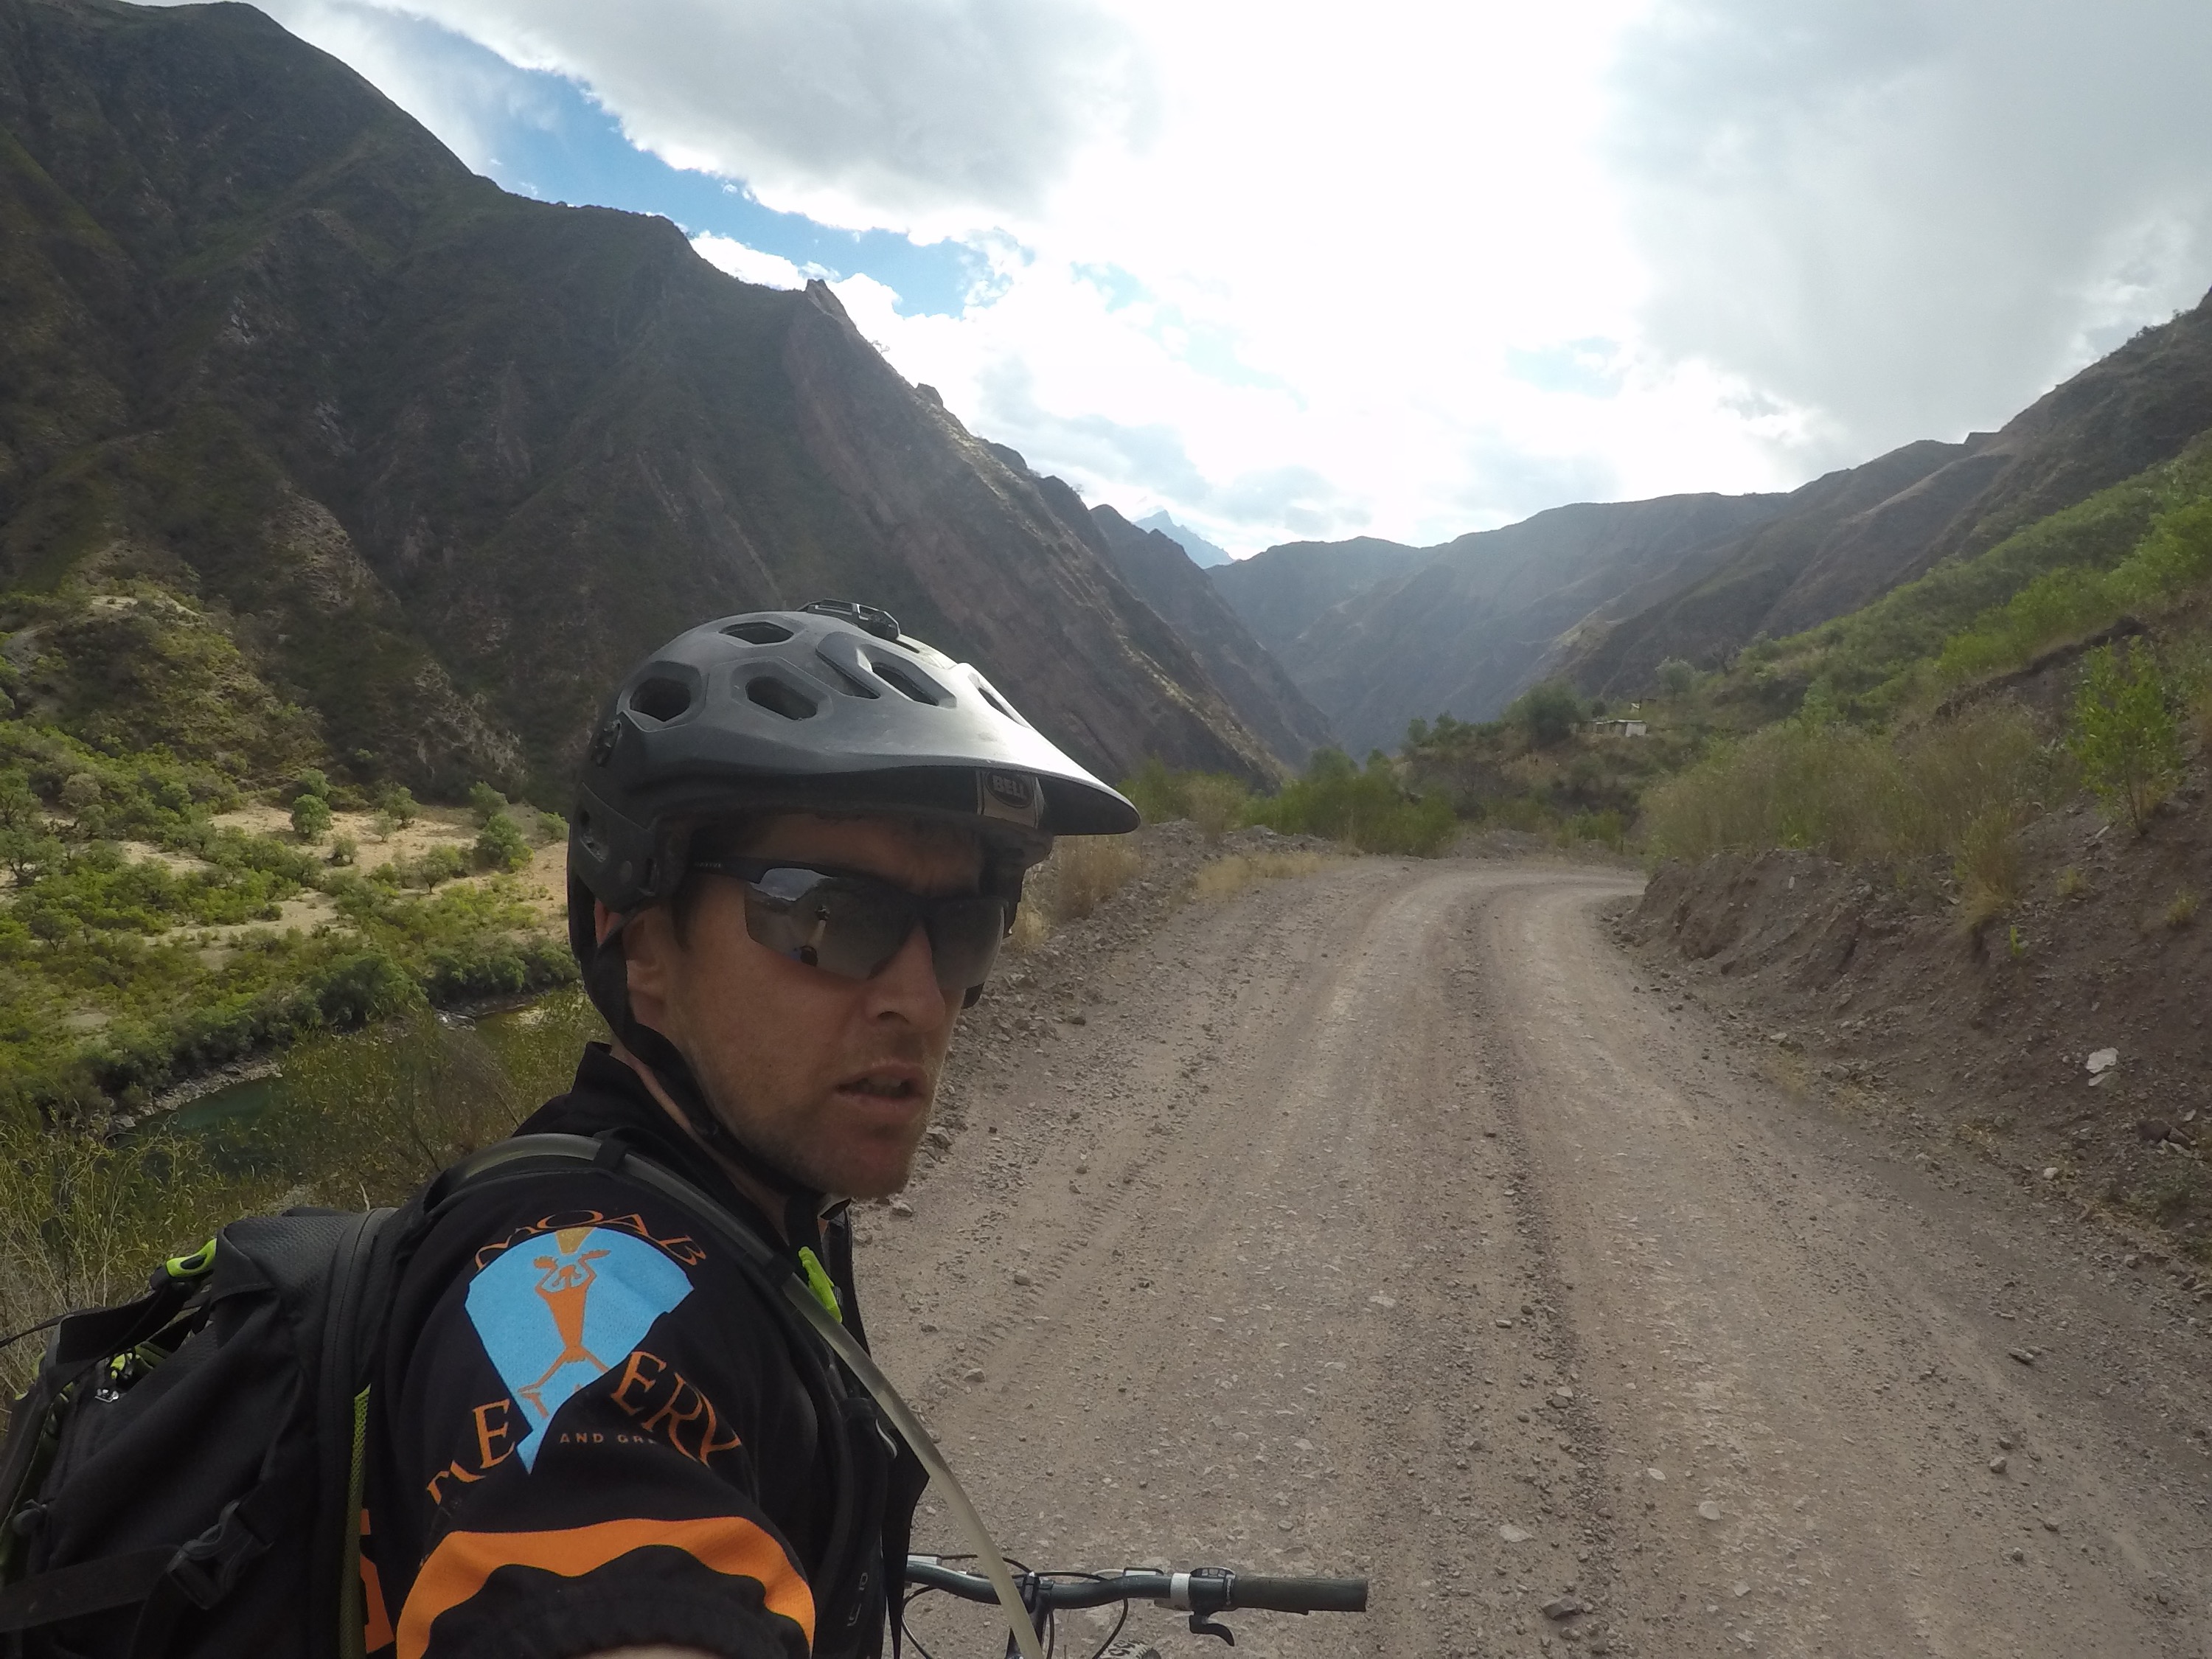 MTB guide Bill on this MTB tour in Cusco